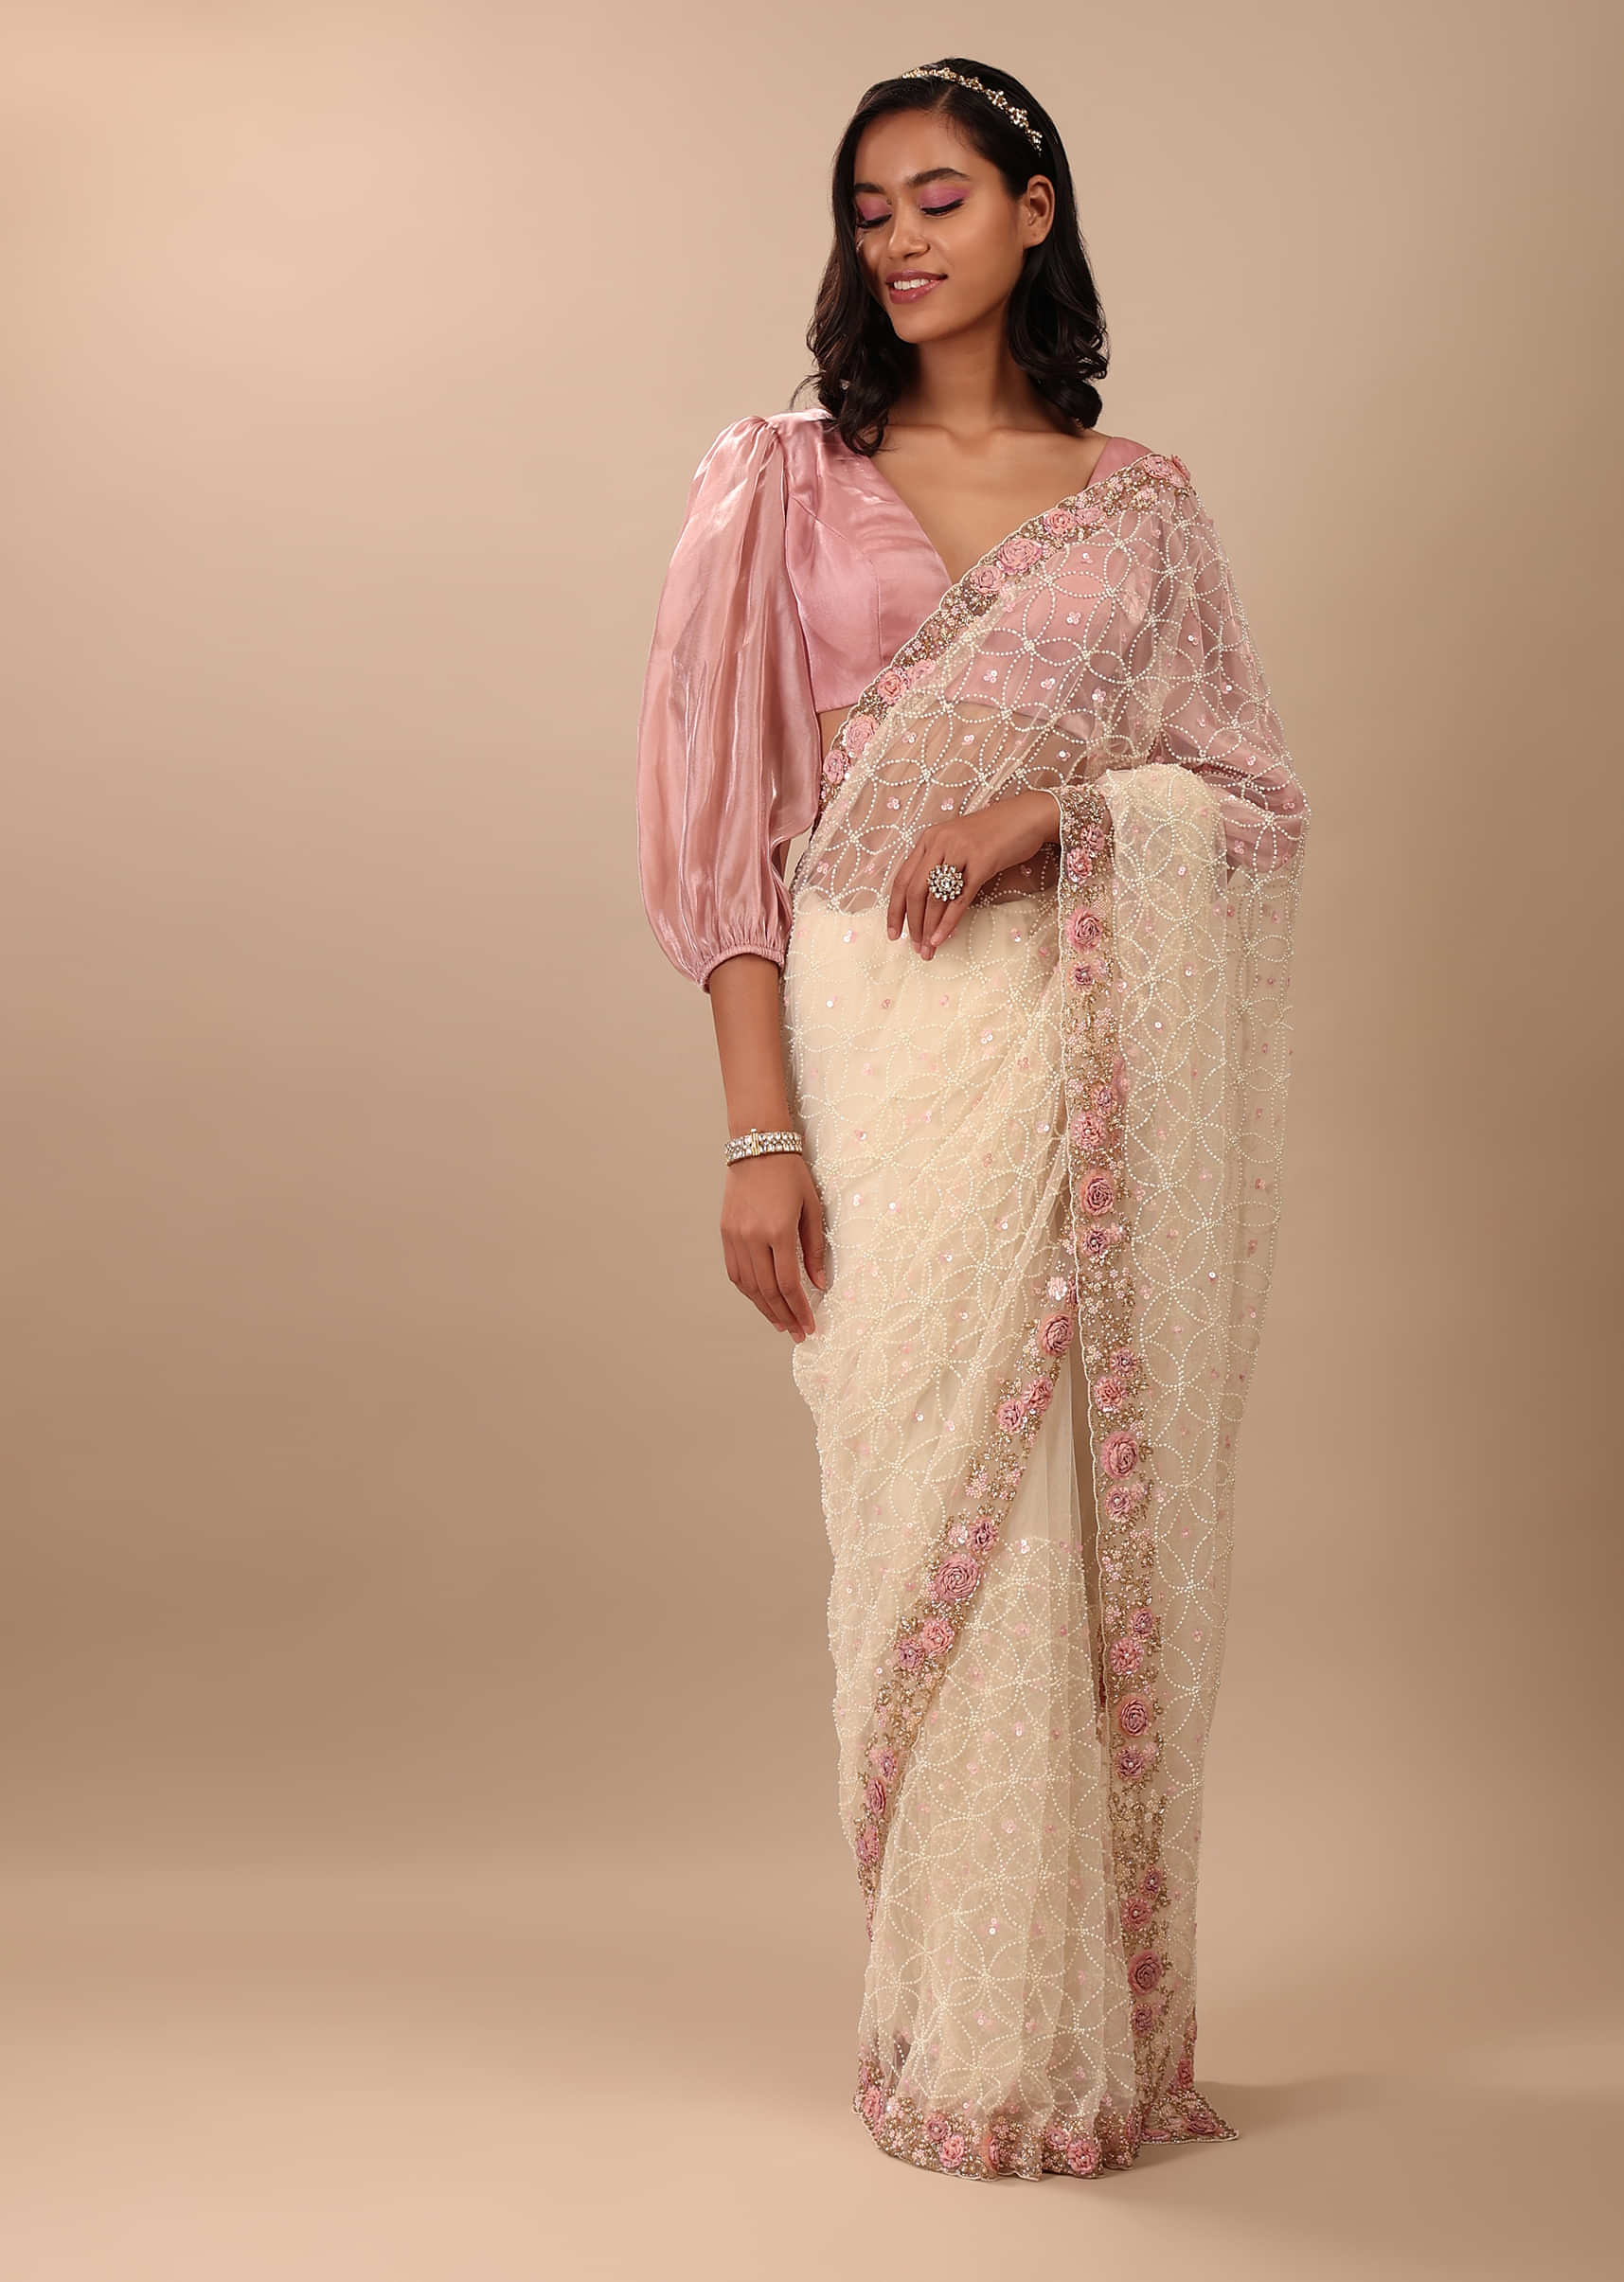 Gardenia White Saree Fully Embroidered In Net Fabric